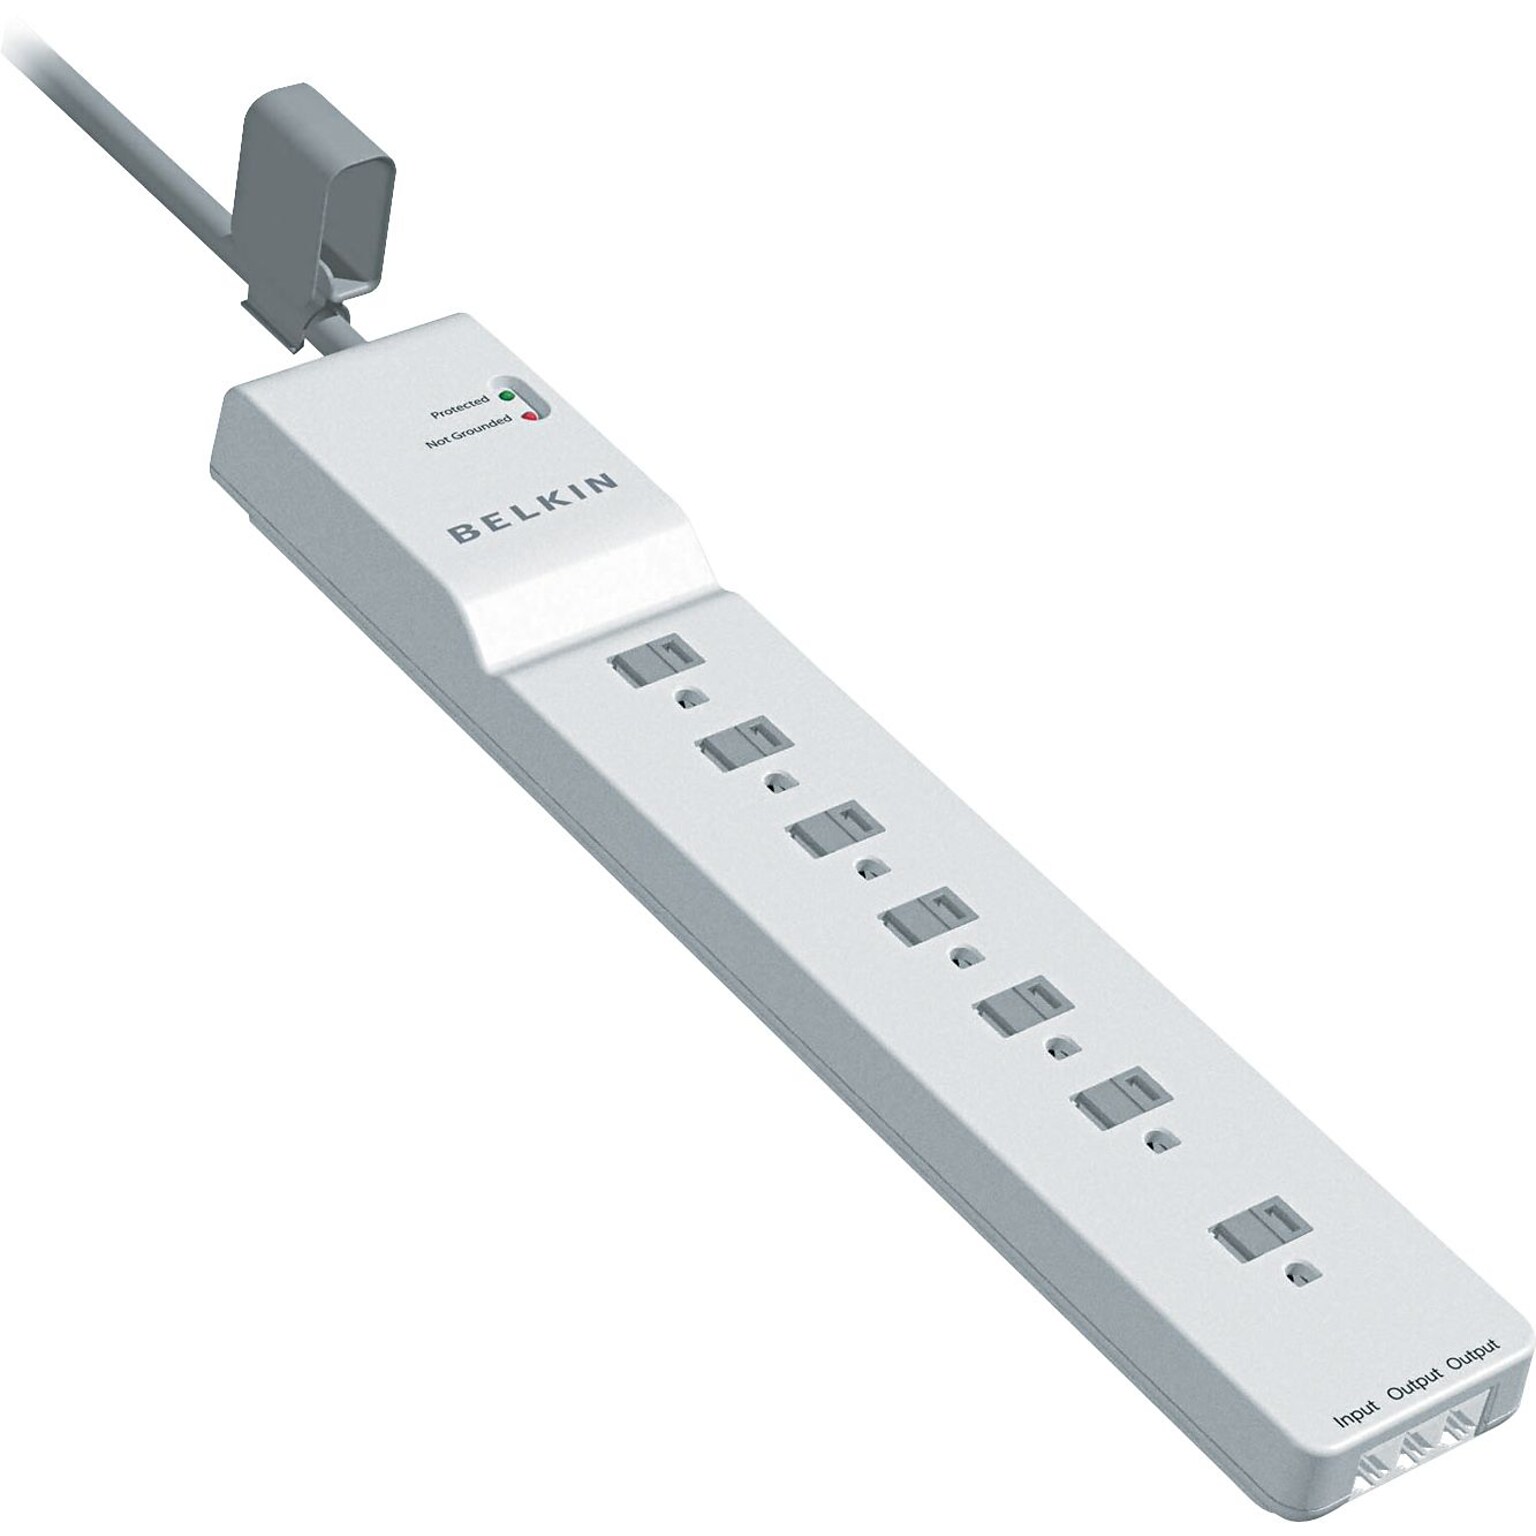 Belkin Home Series Surgemaster 7 Outlet Surge Protector, 12 Cord, 2320 Joules (BE107200-12)